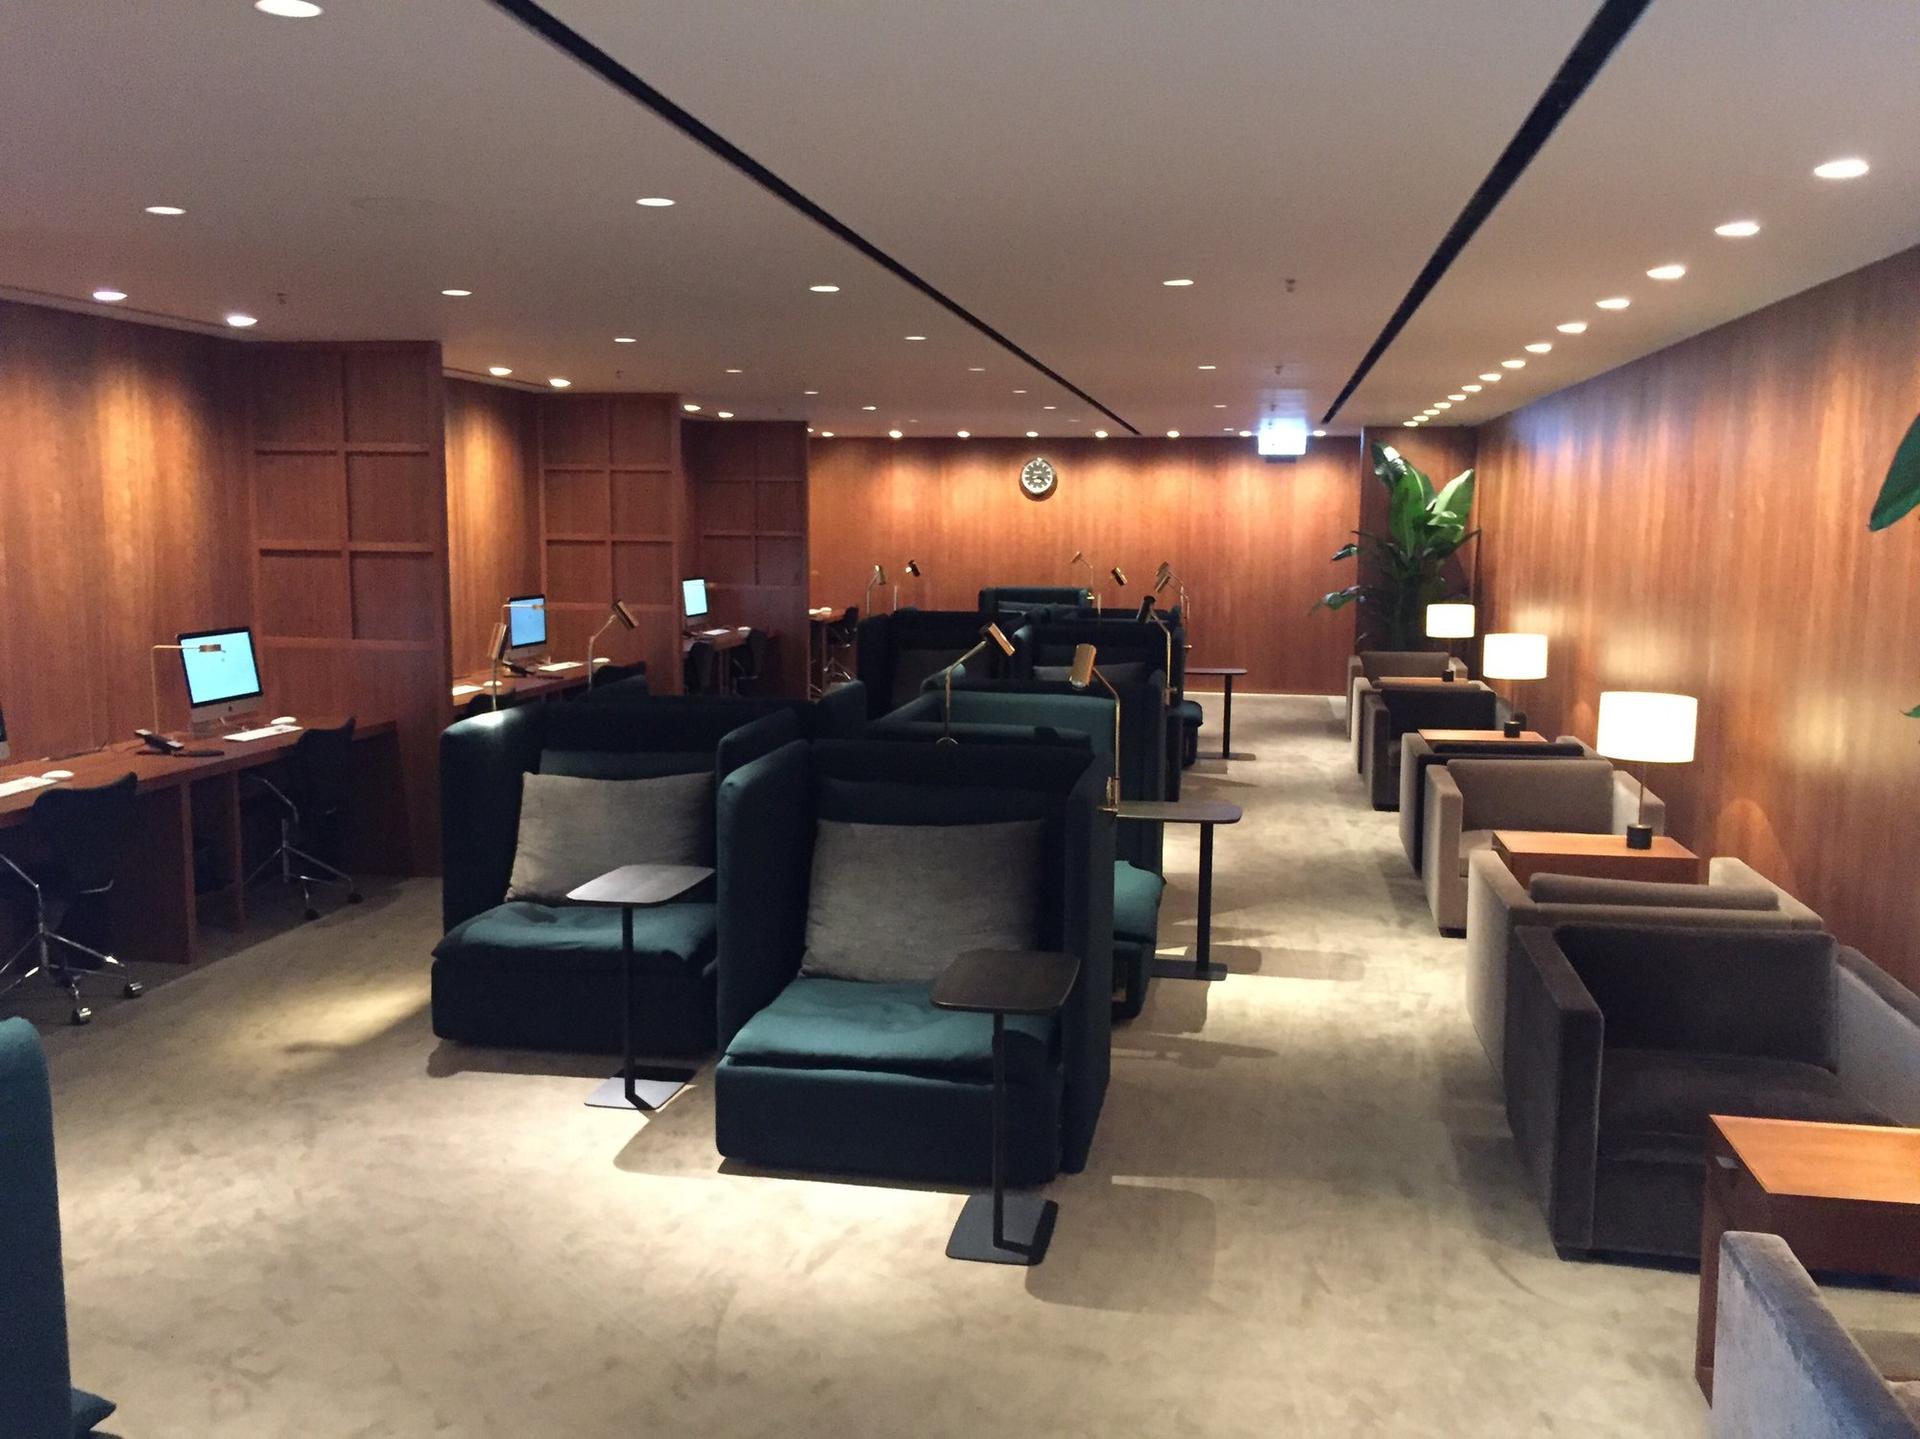 Cathay Pacific The Pier Business Class Lounge image 21 of 61